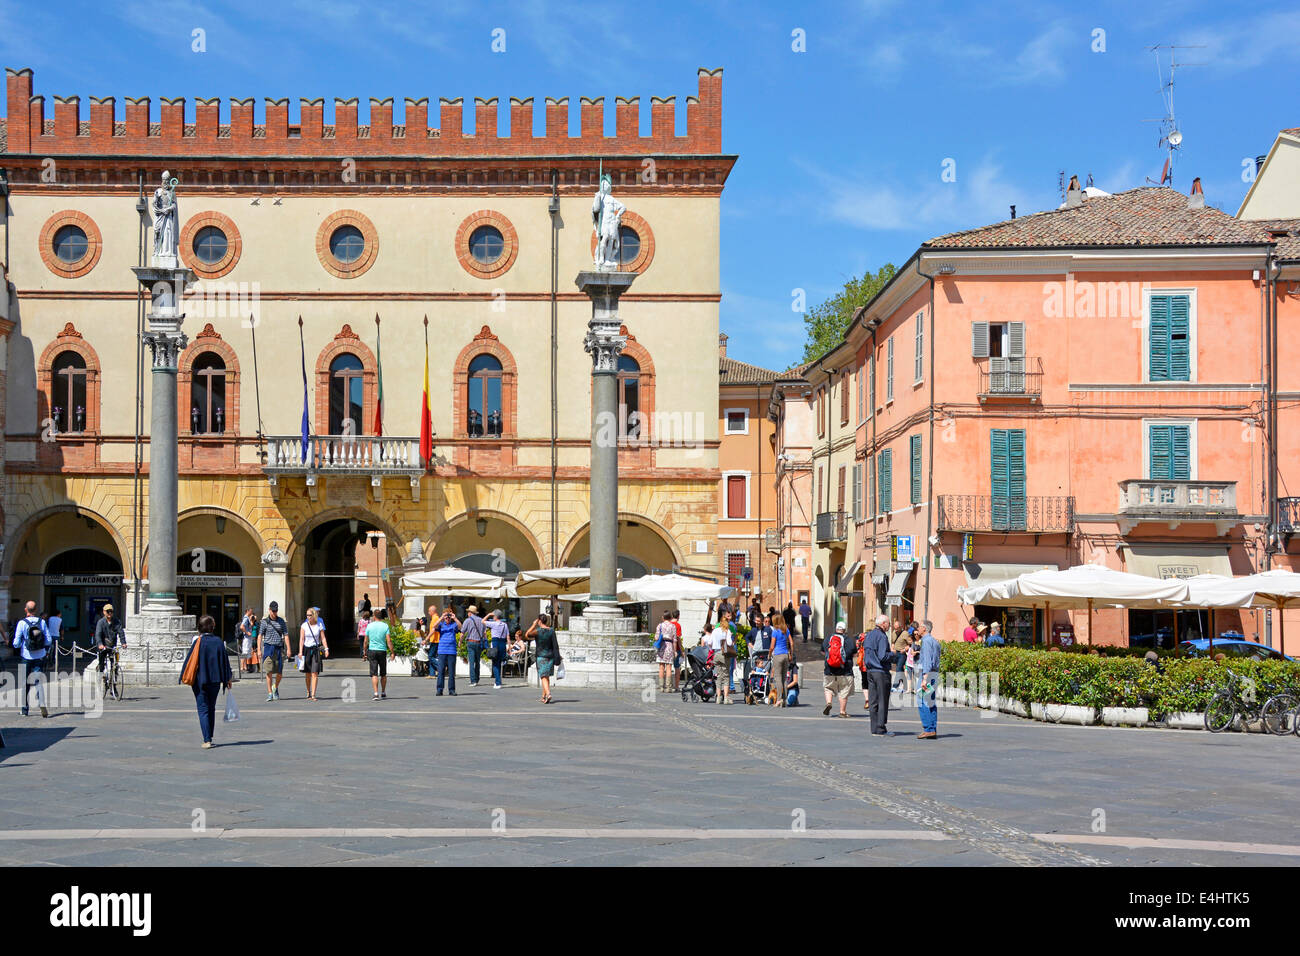 Piazza del Popolo Ravenna buildings and statues tourists & locals in the Town Square blue sky summer sunny day in Emilia Romagna Italy Europe Stock Photo